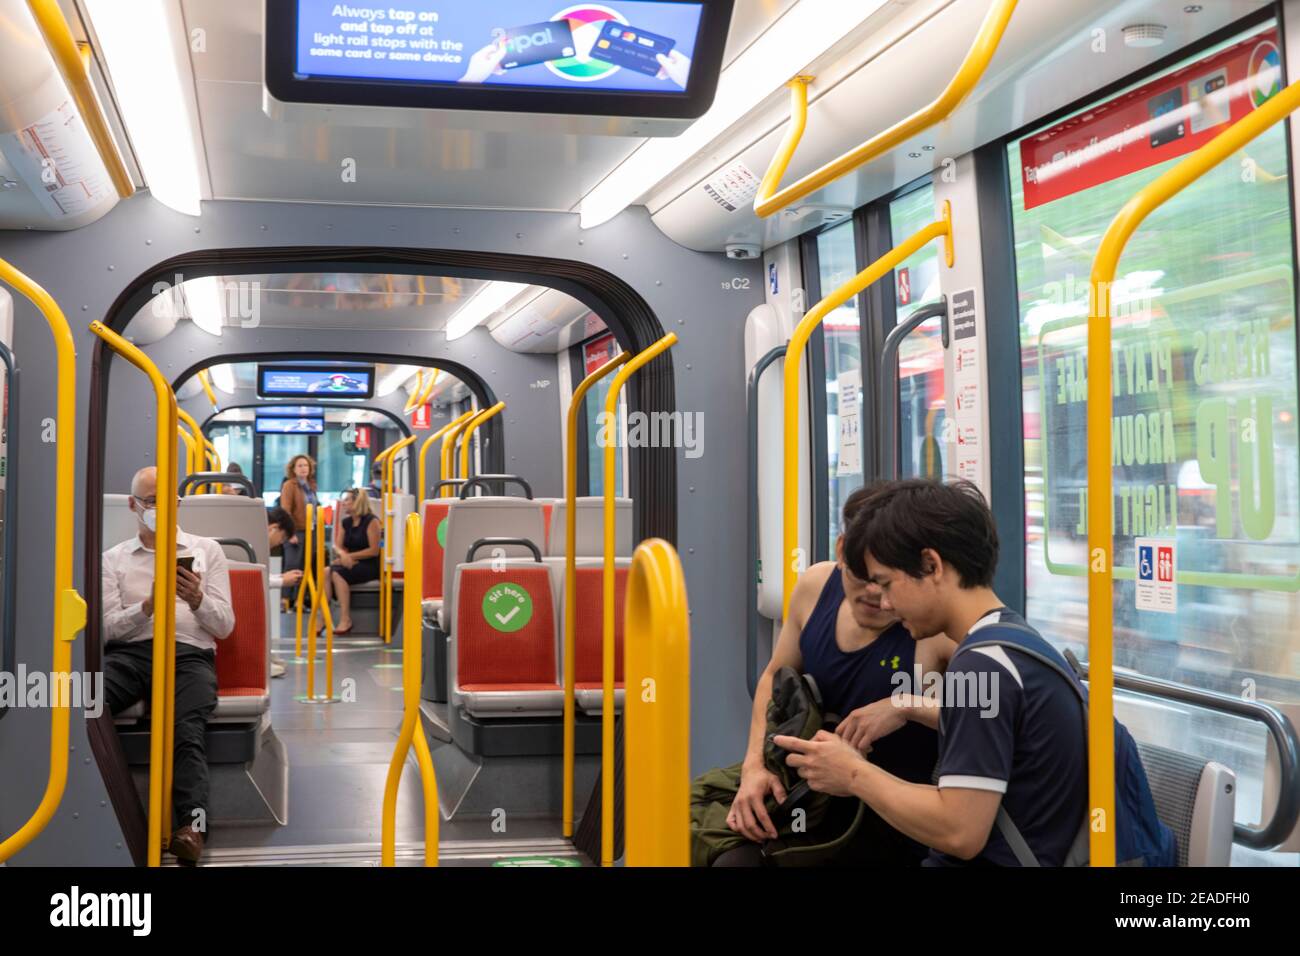 Sydney light rail train carriage interior, passengers commuting, sit here stickers act as social distancing during covid 19 pandemic,Sydney,Australia Stock Photo